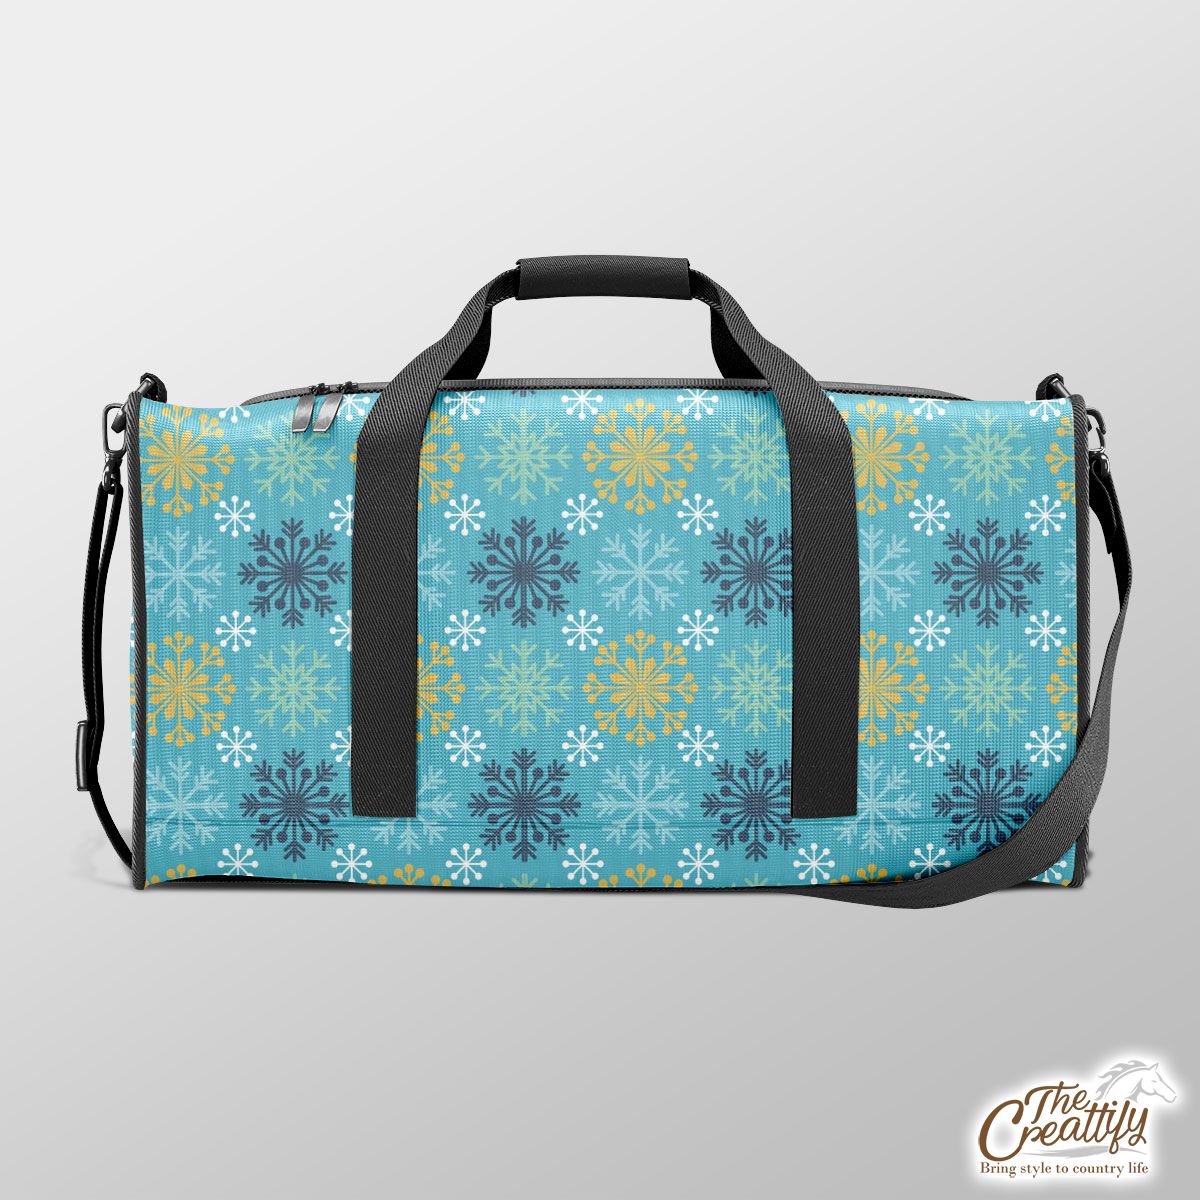 Blue And Yellow Snowflake Pattern Duffle Bag